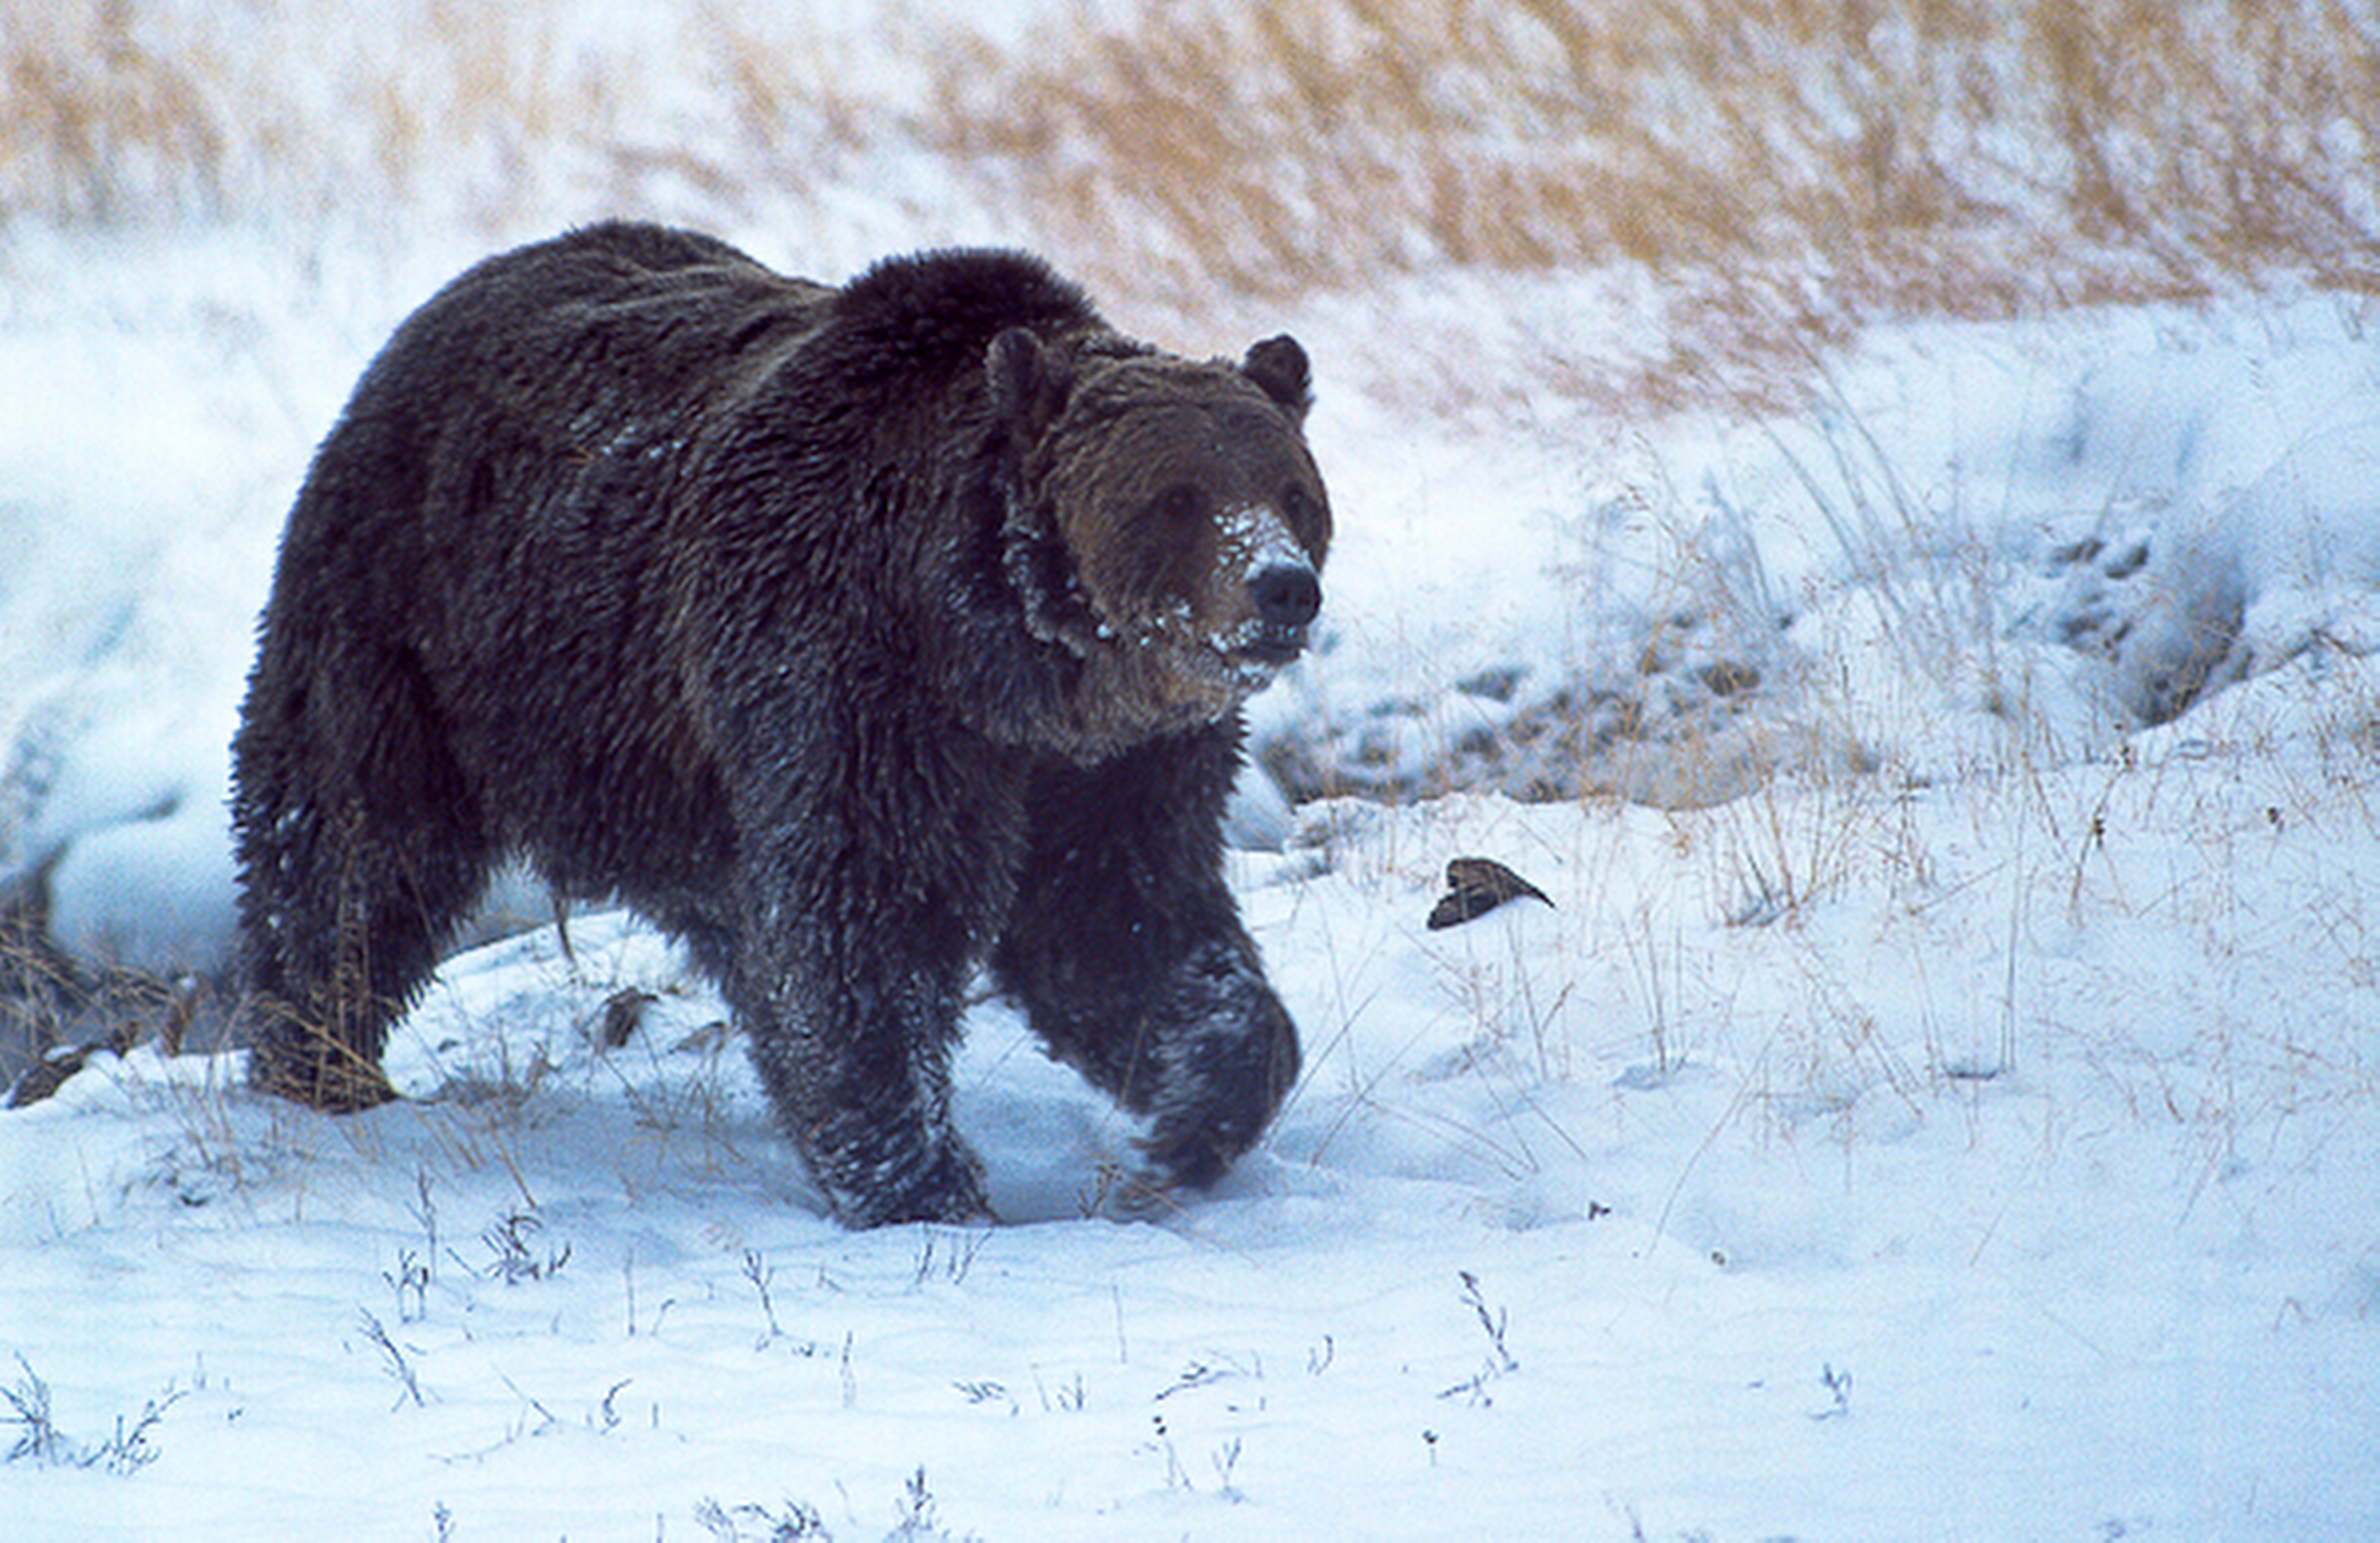 Yellowstone National Park grizzly bear known as "Scarface" in Oct. 2005. (Ray Paunovich—AP)